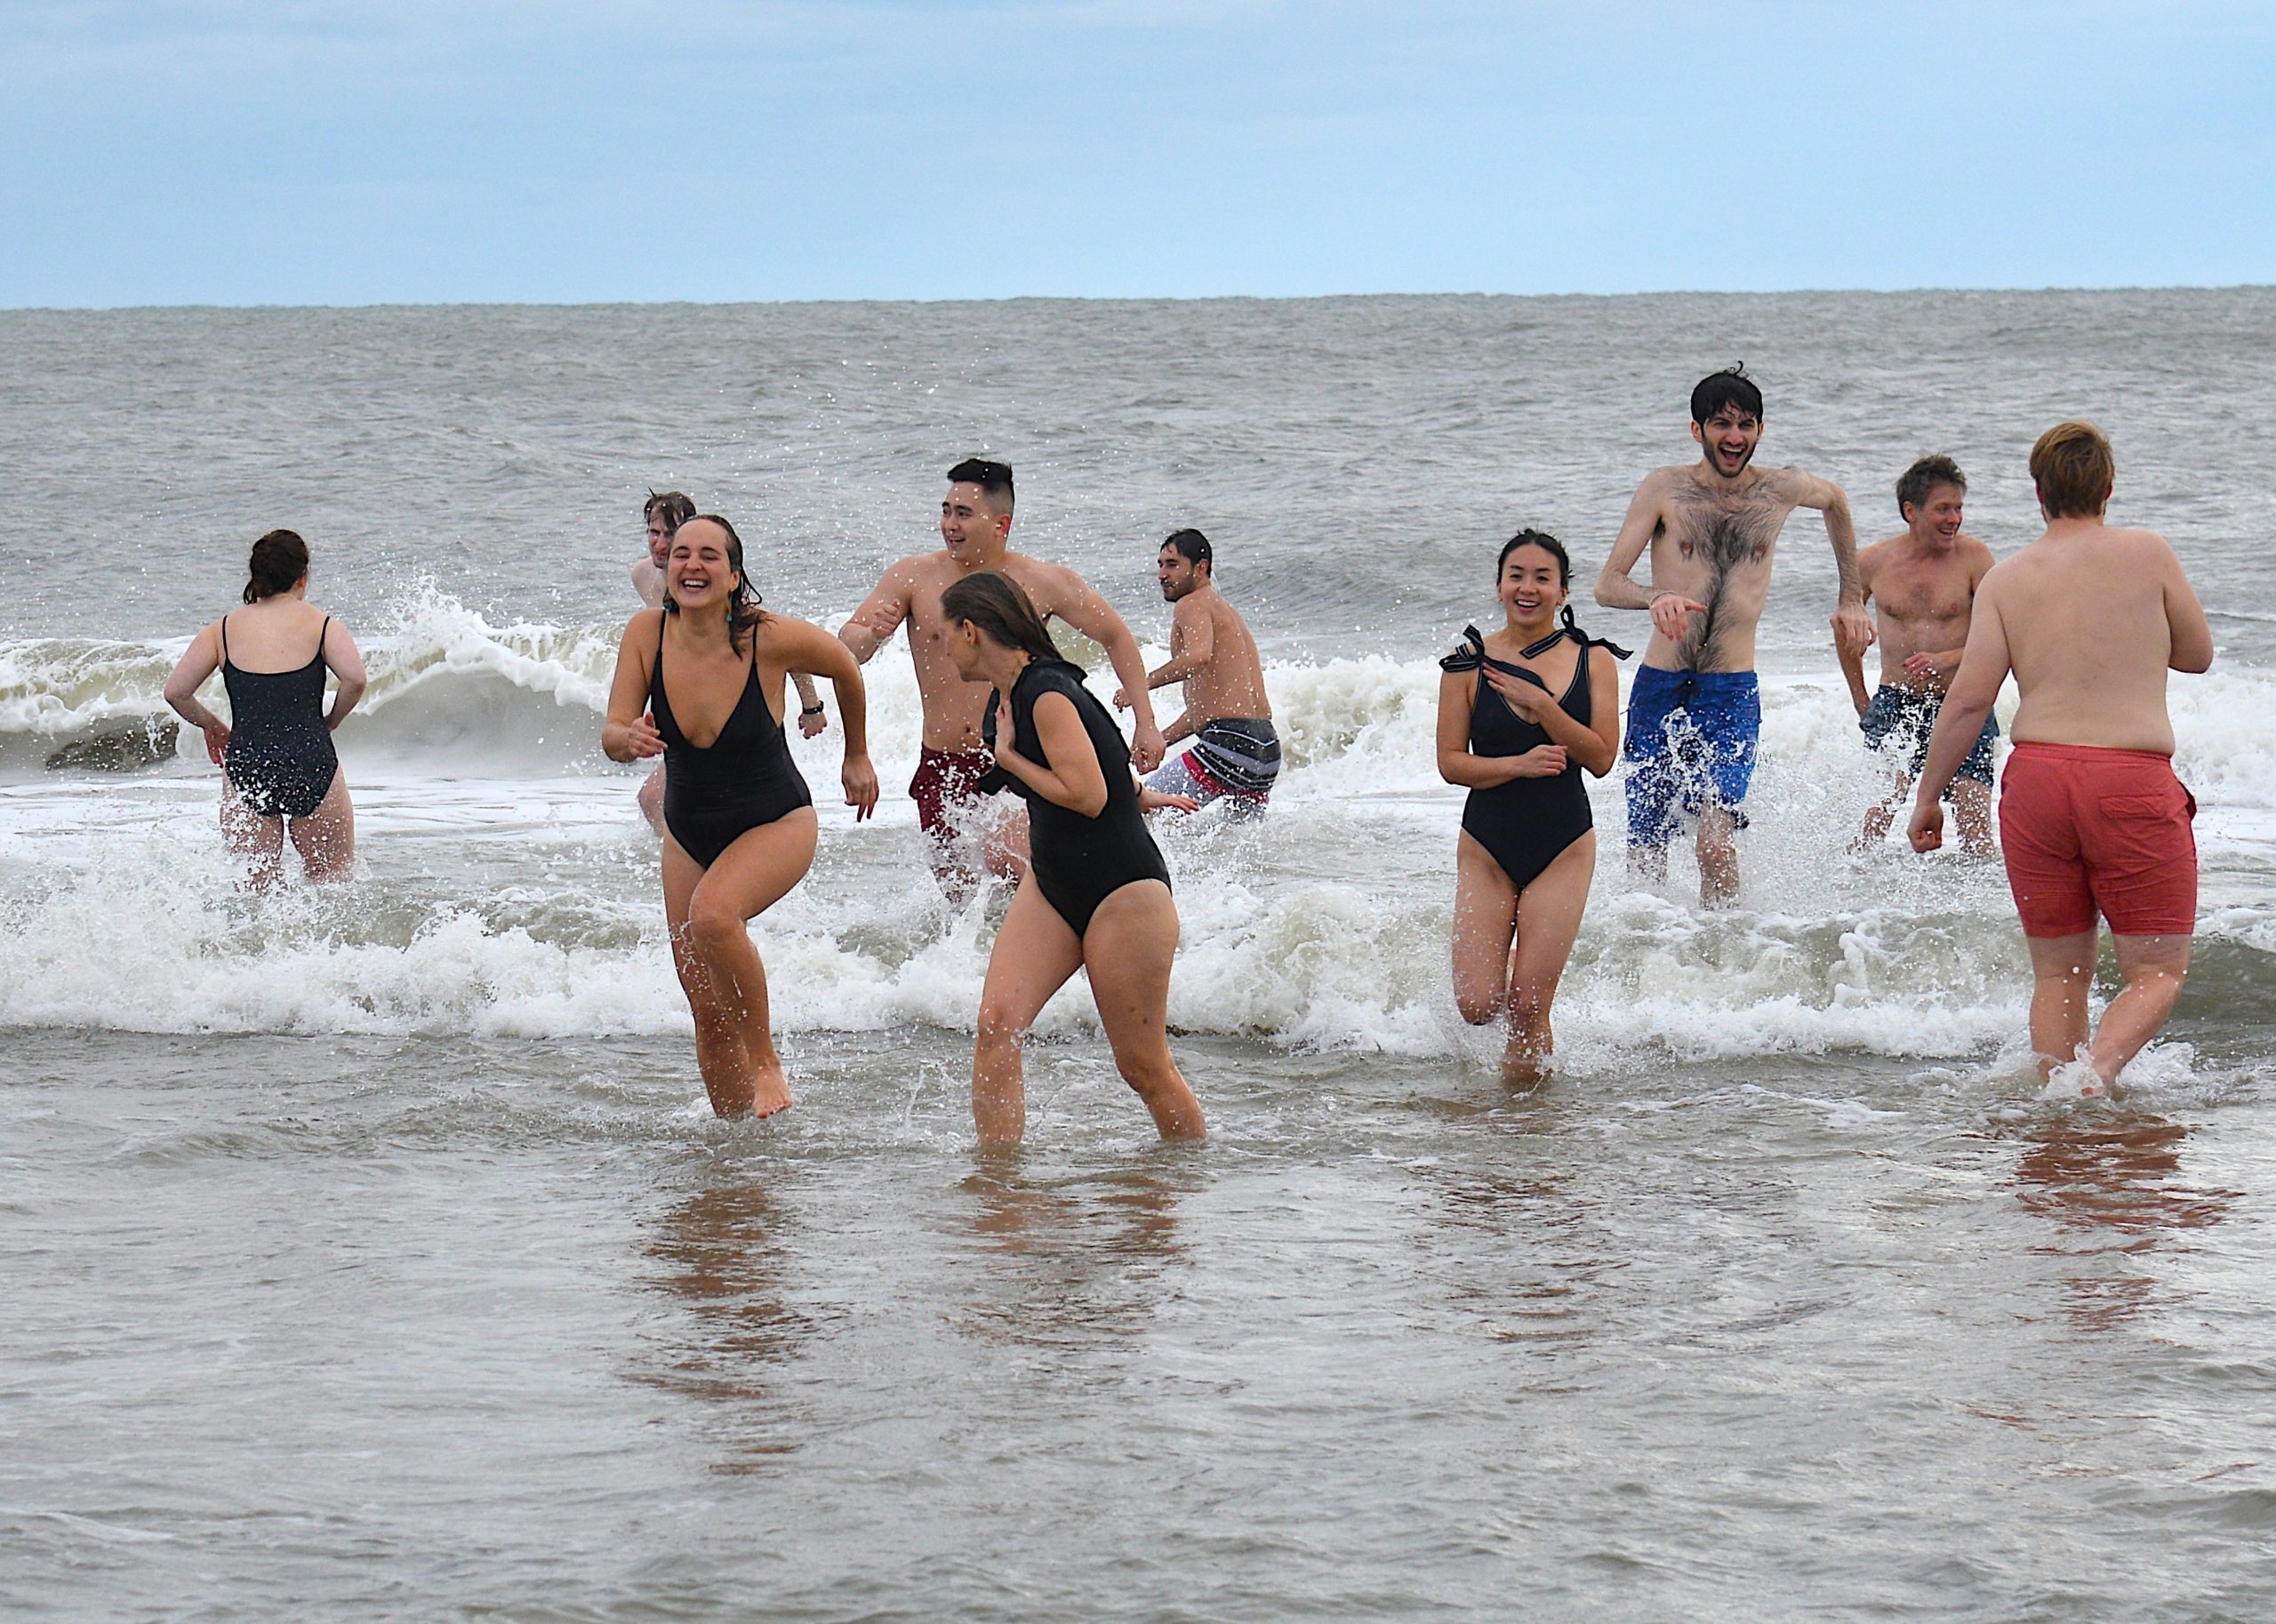 Dozens of brave souls gathered on New Year's Day for the annual polar plunge at a Wainscott beach, organized by the Seafood Shop. This year's event raised money for the Sag Harbor food pantry. KYRIL BROMLEY